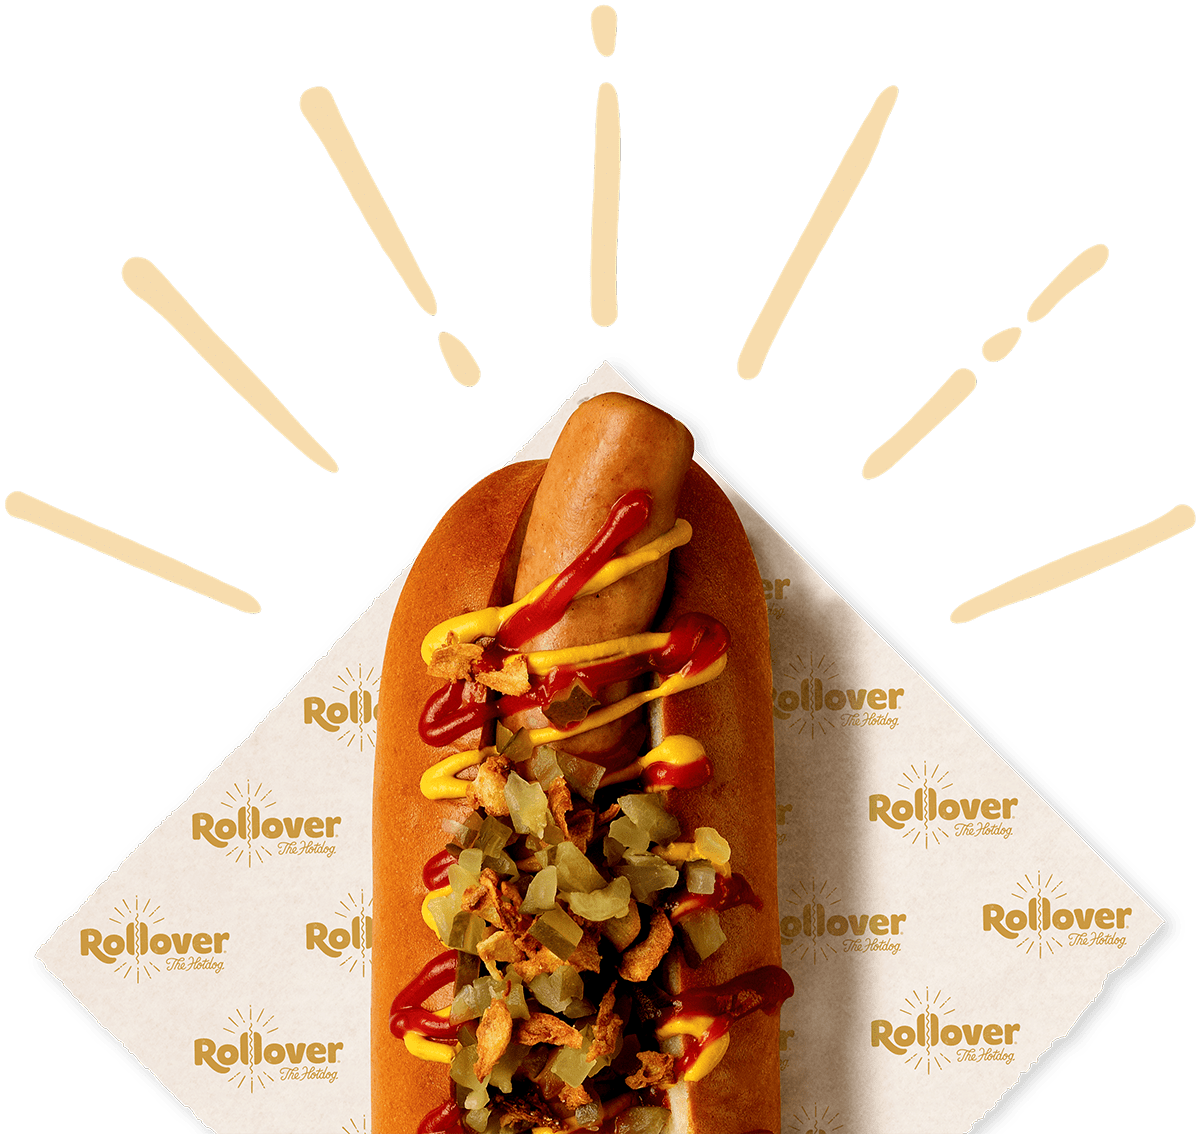 Hot Dogs Takeaways and Restaurants Delivering Near Me